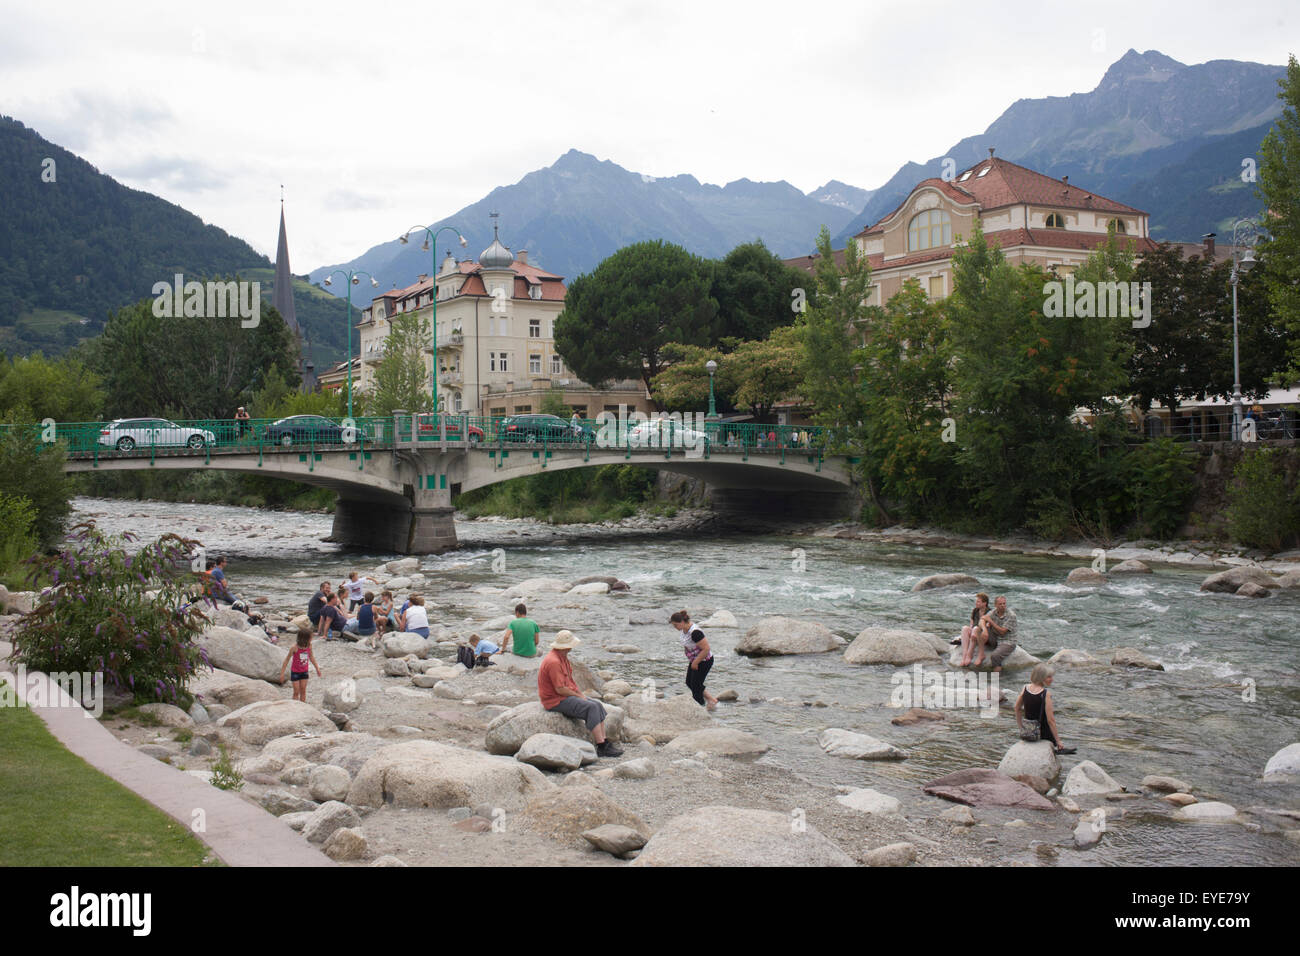 Locals bathe in the Passer River, in the South Tyrolean town of Meran-Merano, best known for its spa resorts, located within a basin, surrounded by mountains standing up to 3,335 metres (10,942 feet) above sea level, at the entrance to the Passeier Valley and the Vinschgau. In the past, the town has been a popular place of residence for several scientists, literary people, and artists, including Franz Kafka, Ezra Pound, and Paul Lazarsfeld, who appreciated its mild climate. Stock Photo